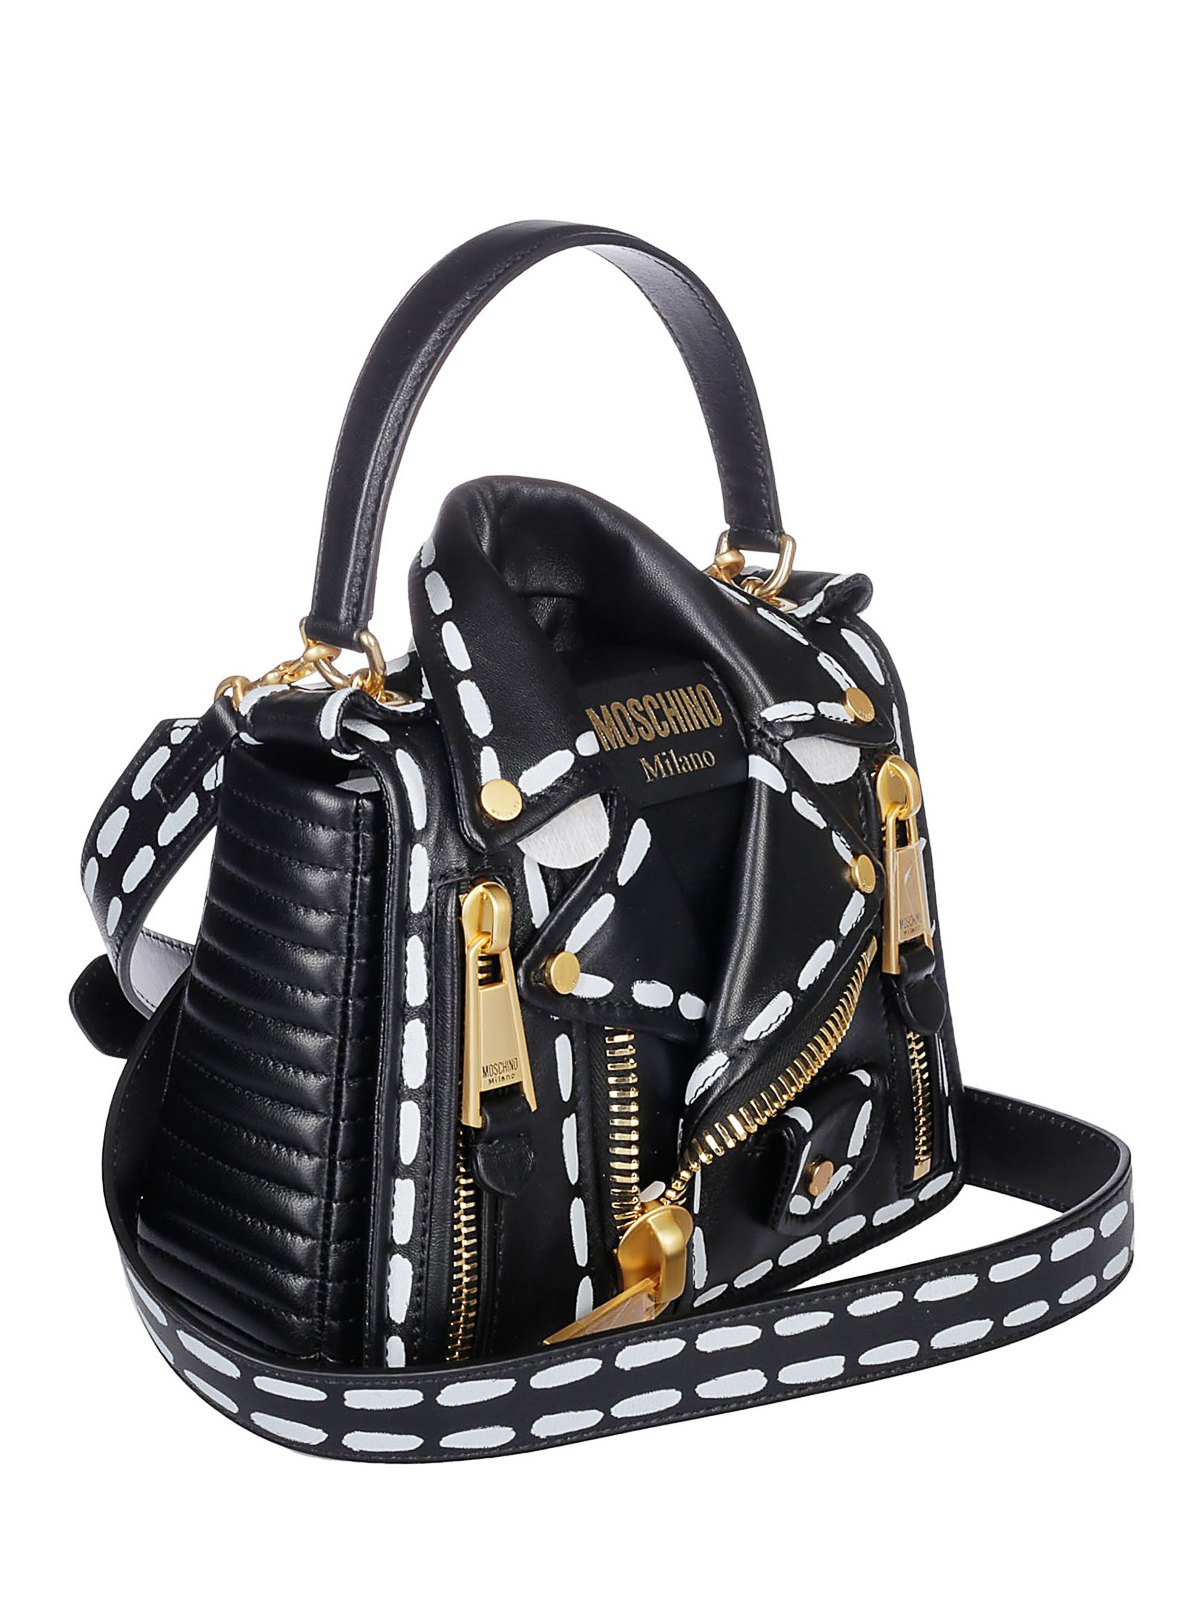 Shoulder bags Moschino - Biker Bag in printed nappa leather 